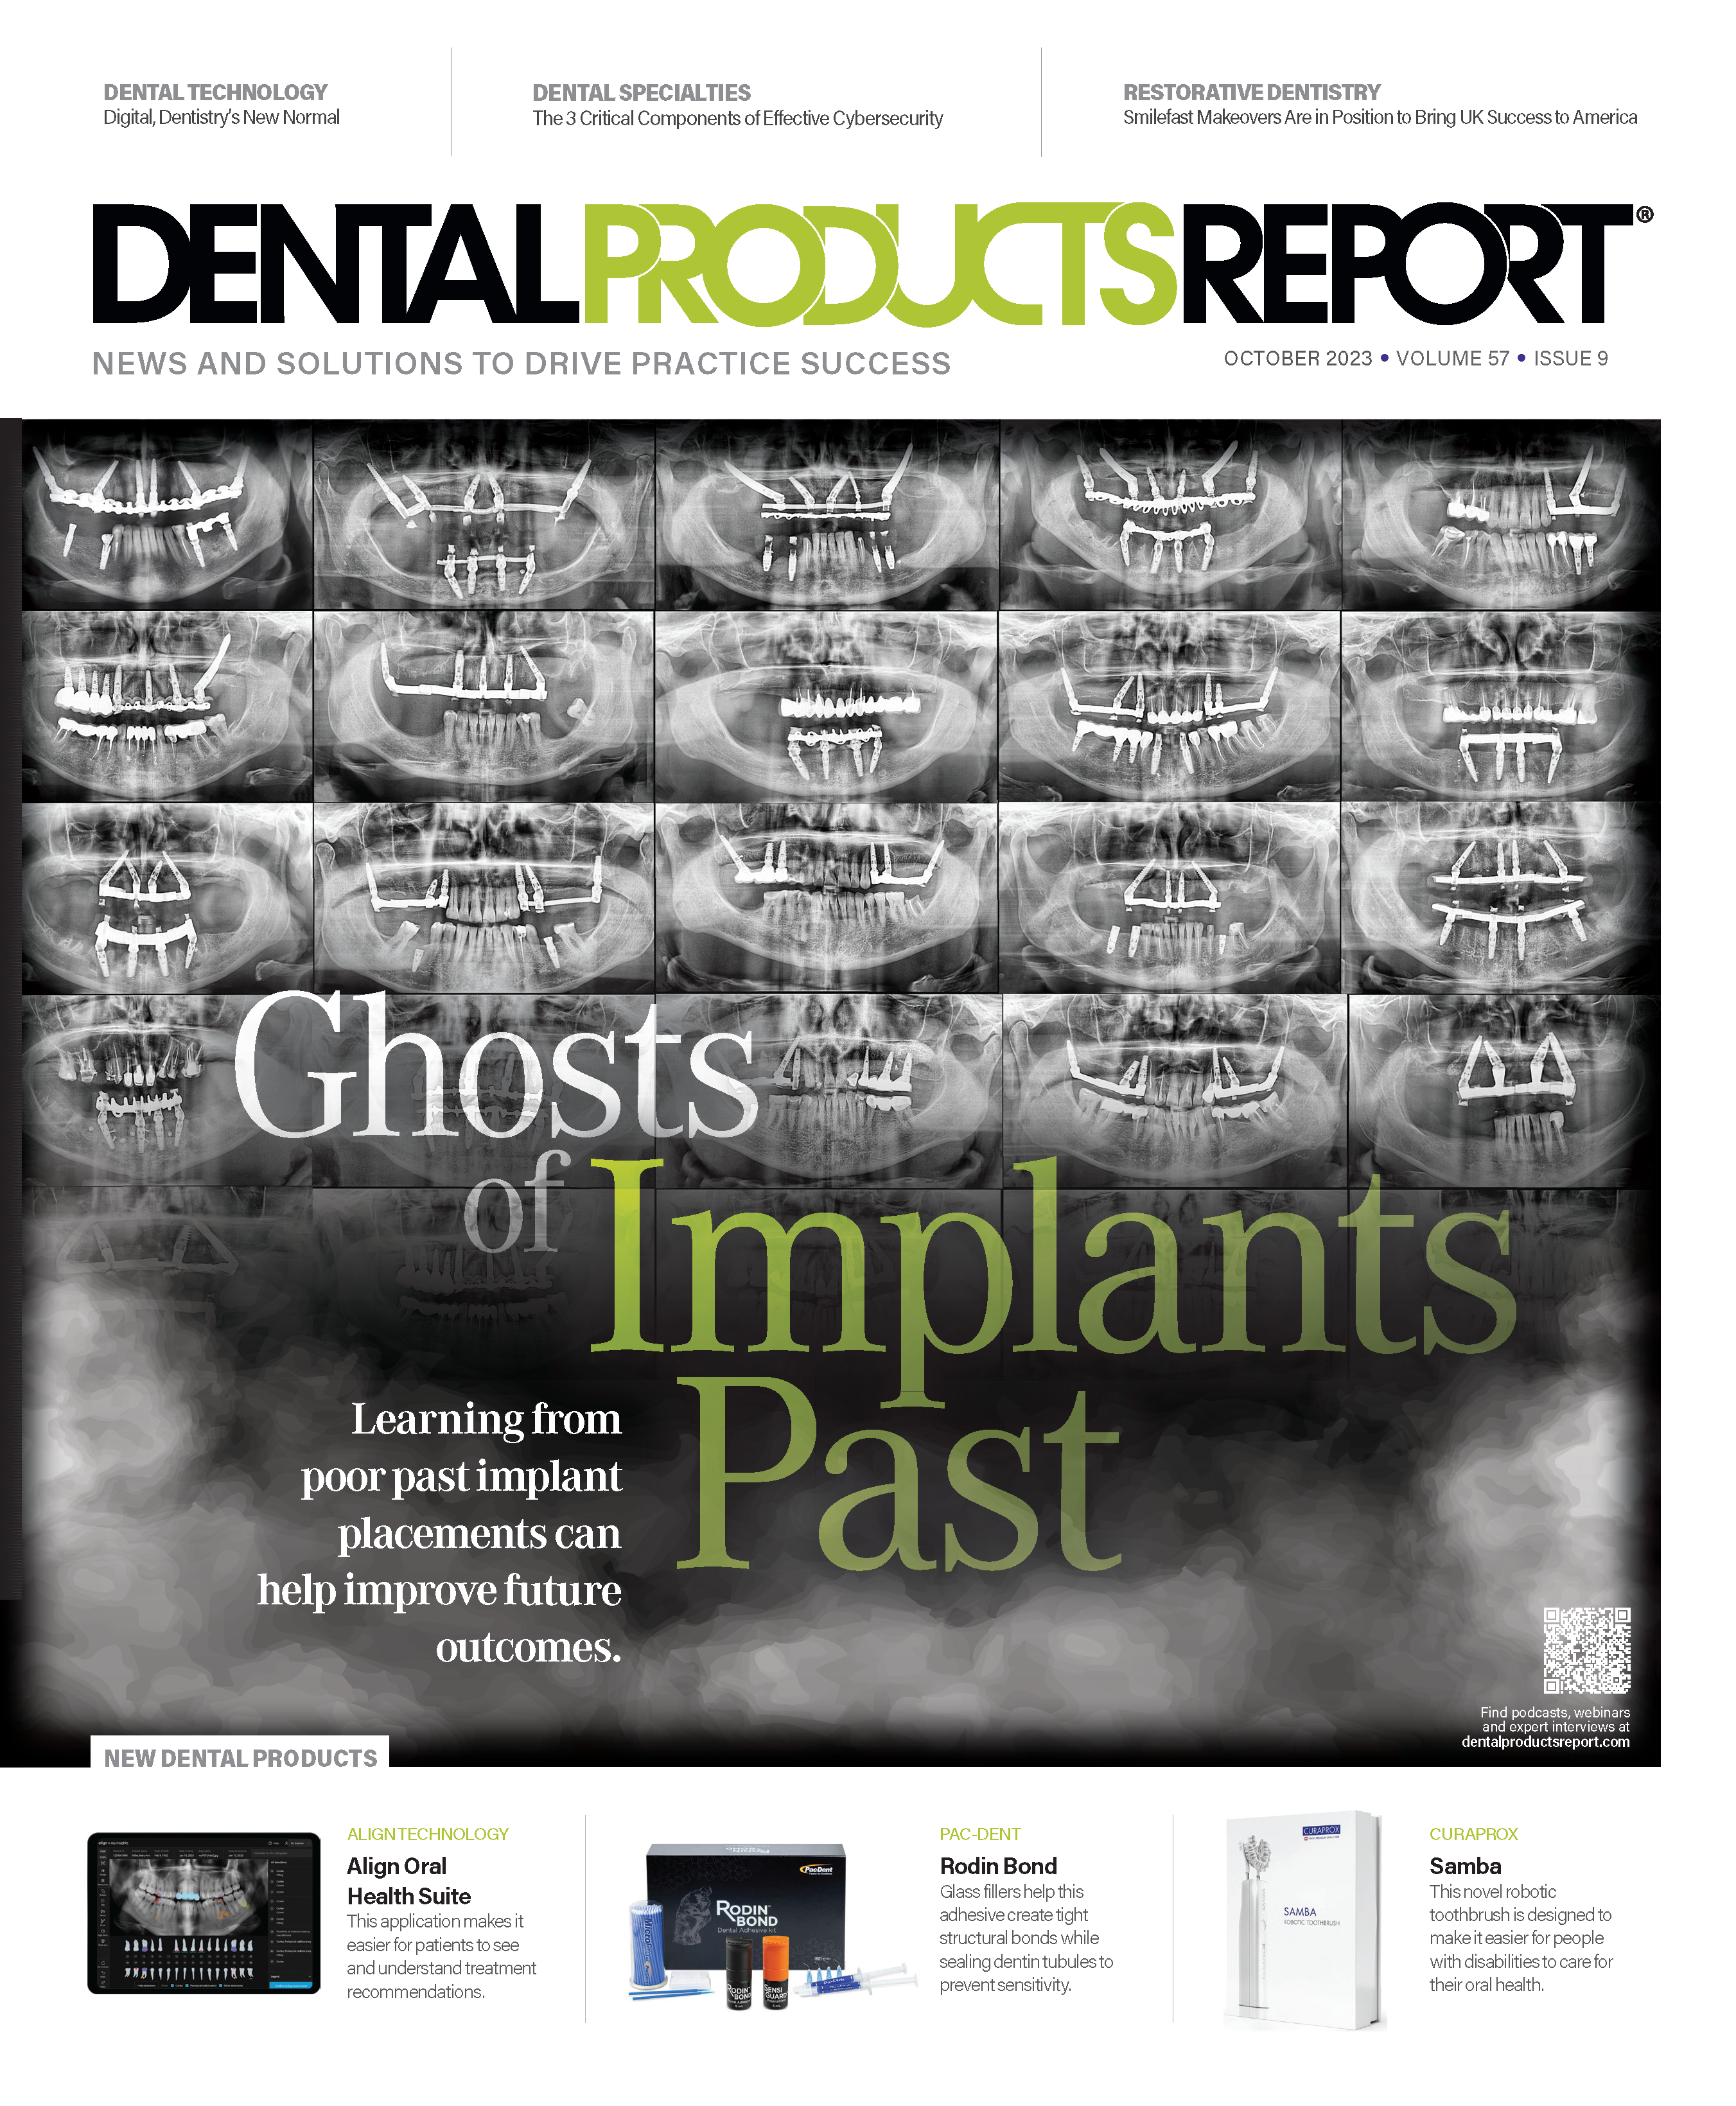 Dental Products Report October 2023 issue cover - The Ghosts of Implants Past